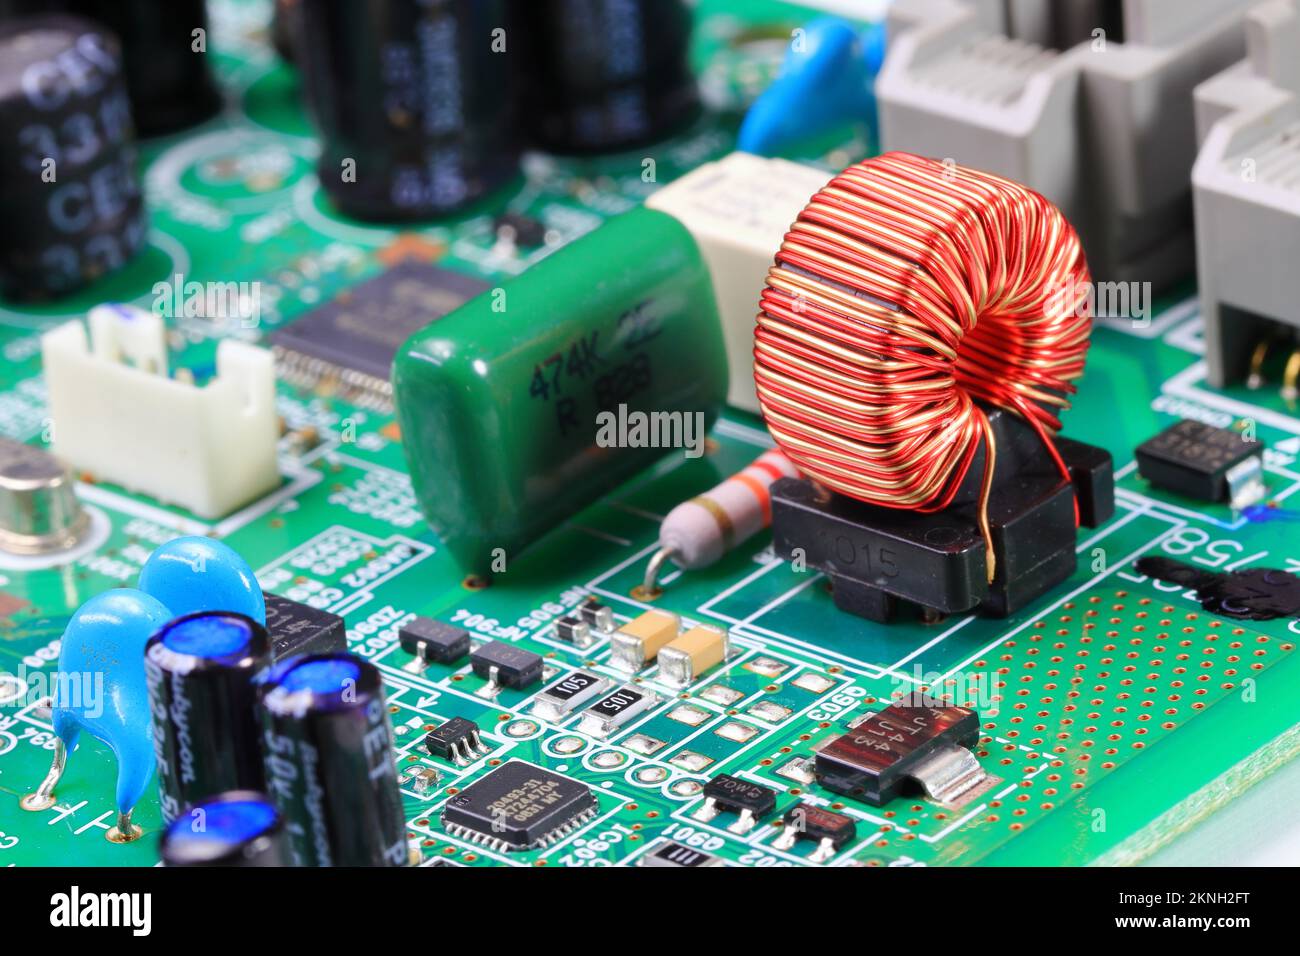 Copper coil or Inductance coil on circuit board, electronic components inside computer. Stock Photo